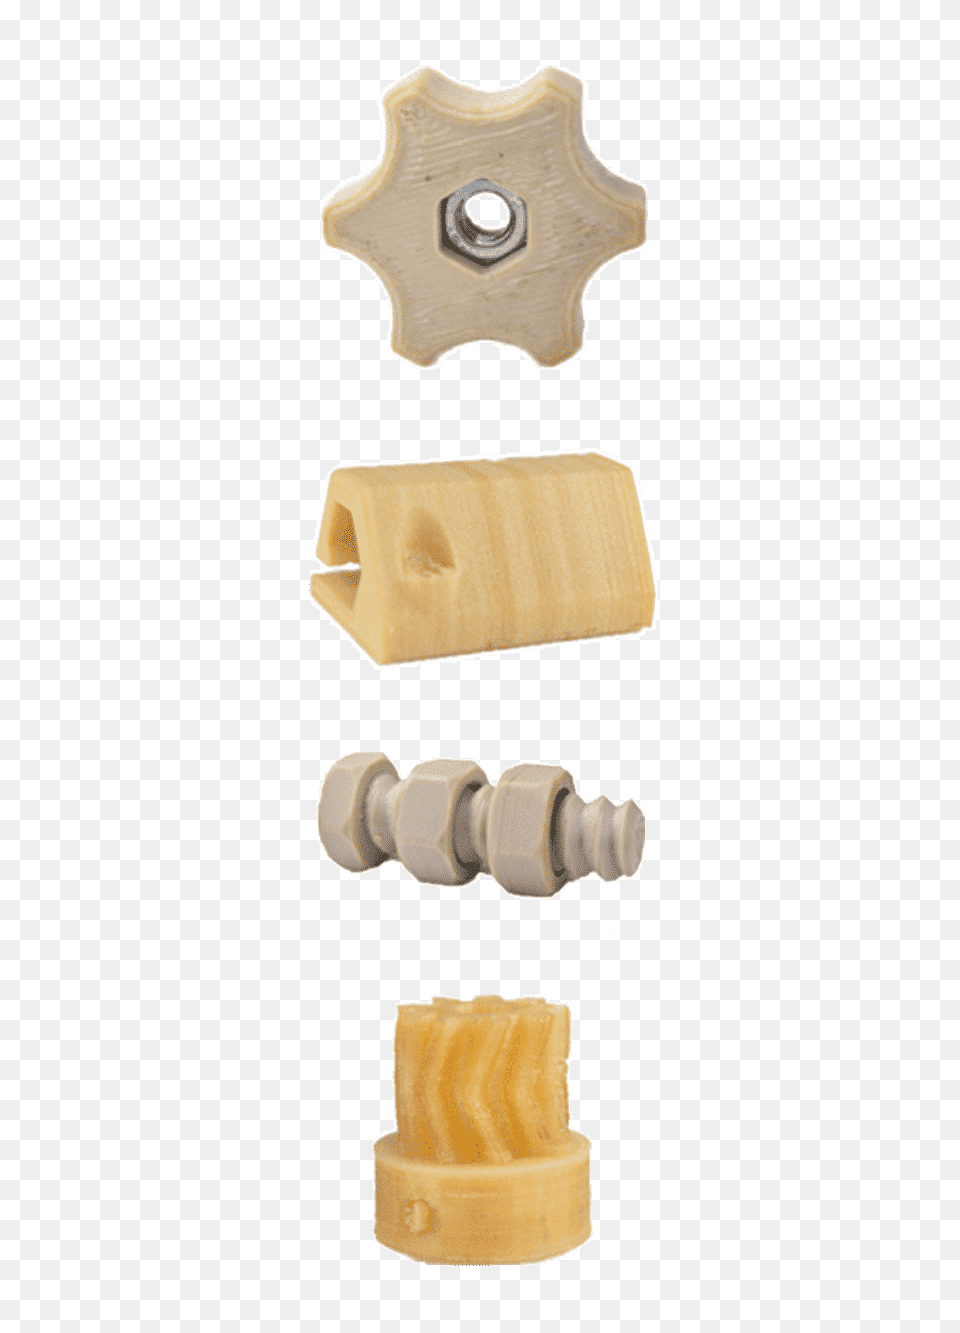 Objects That Are Printed With A 3d Peek Printer 3d Printing, Wood Png